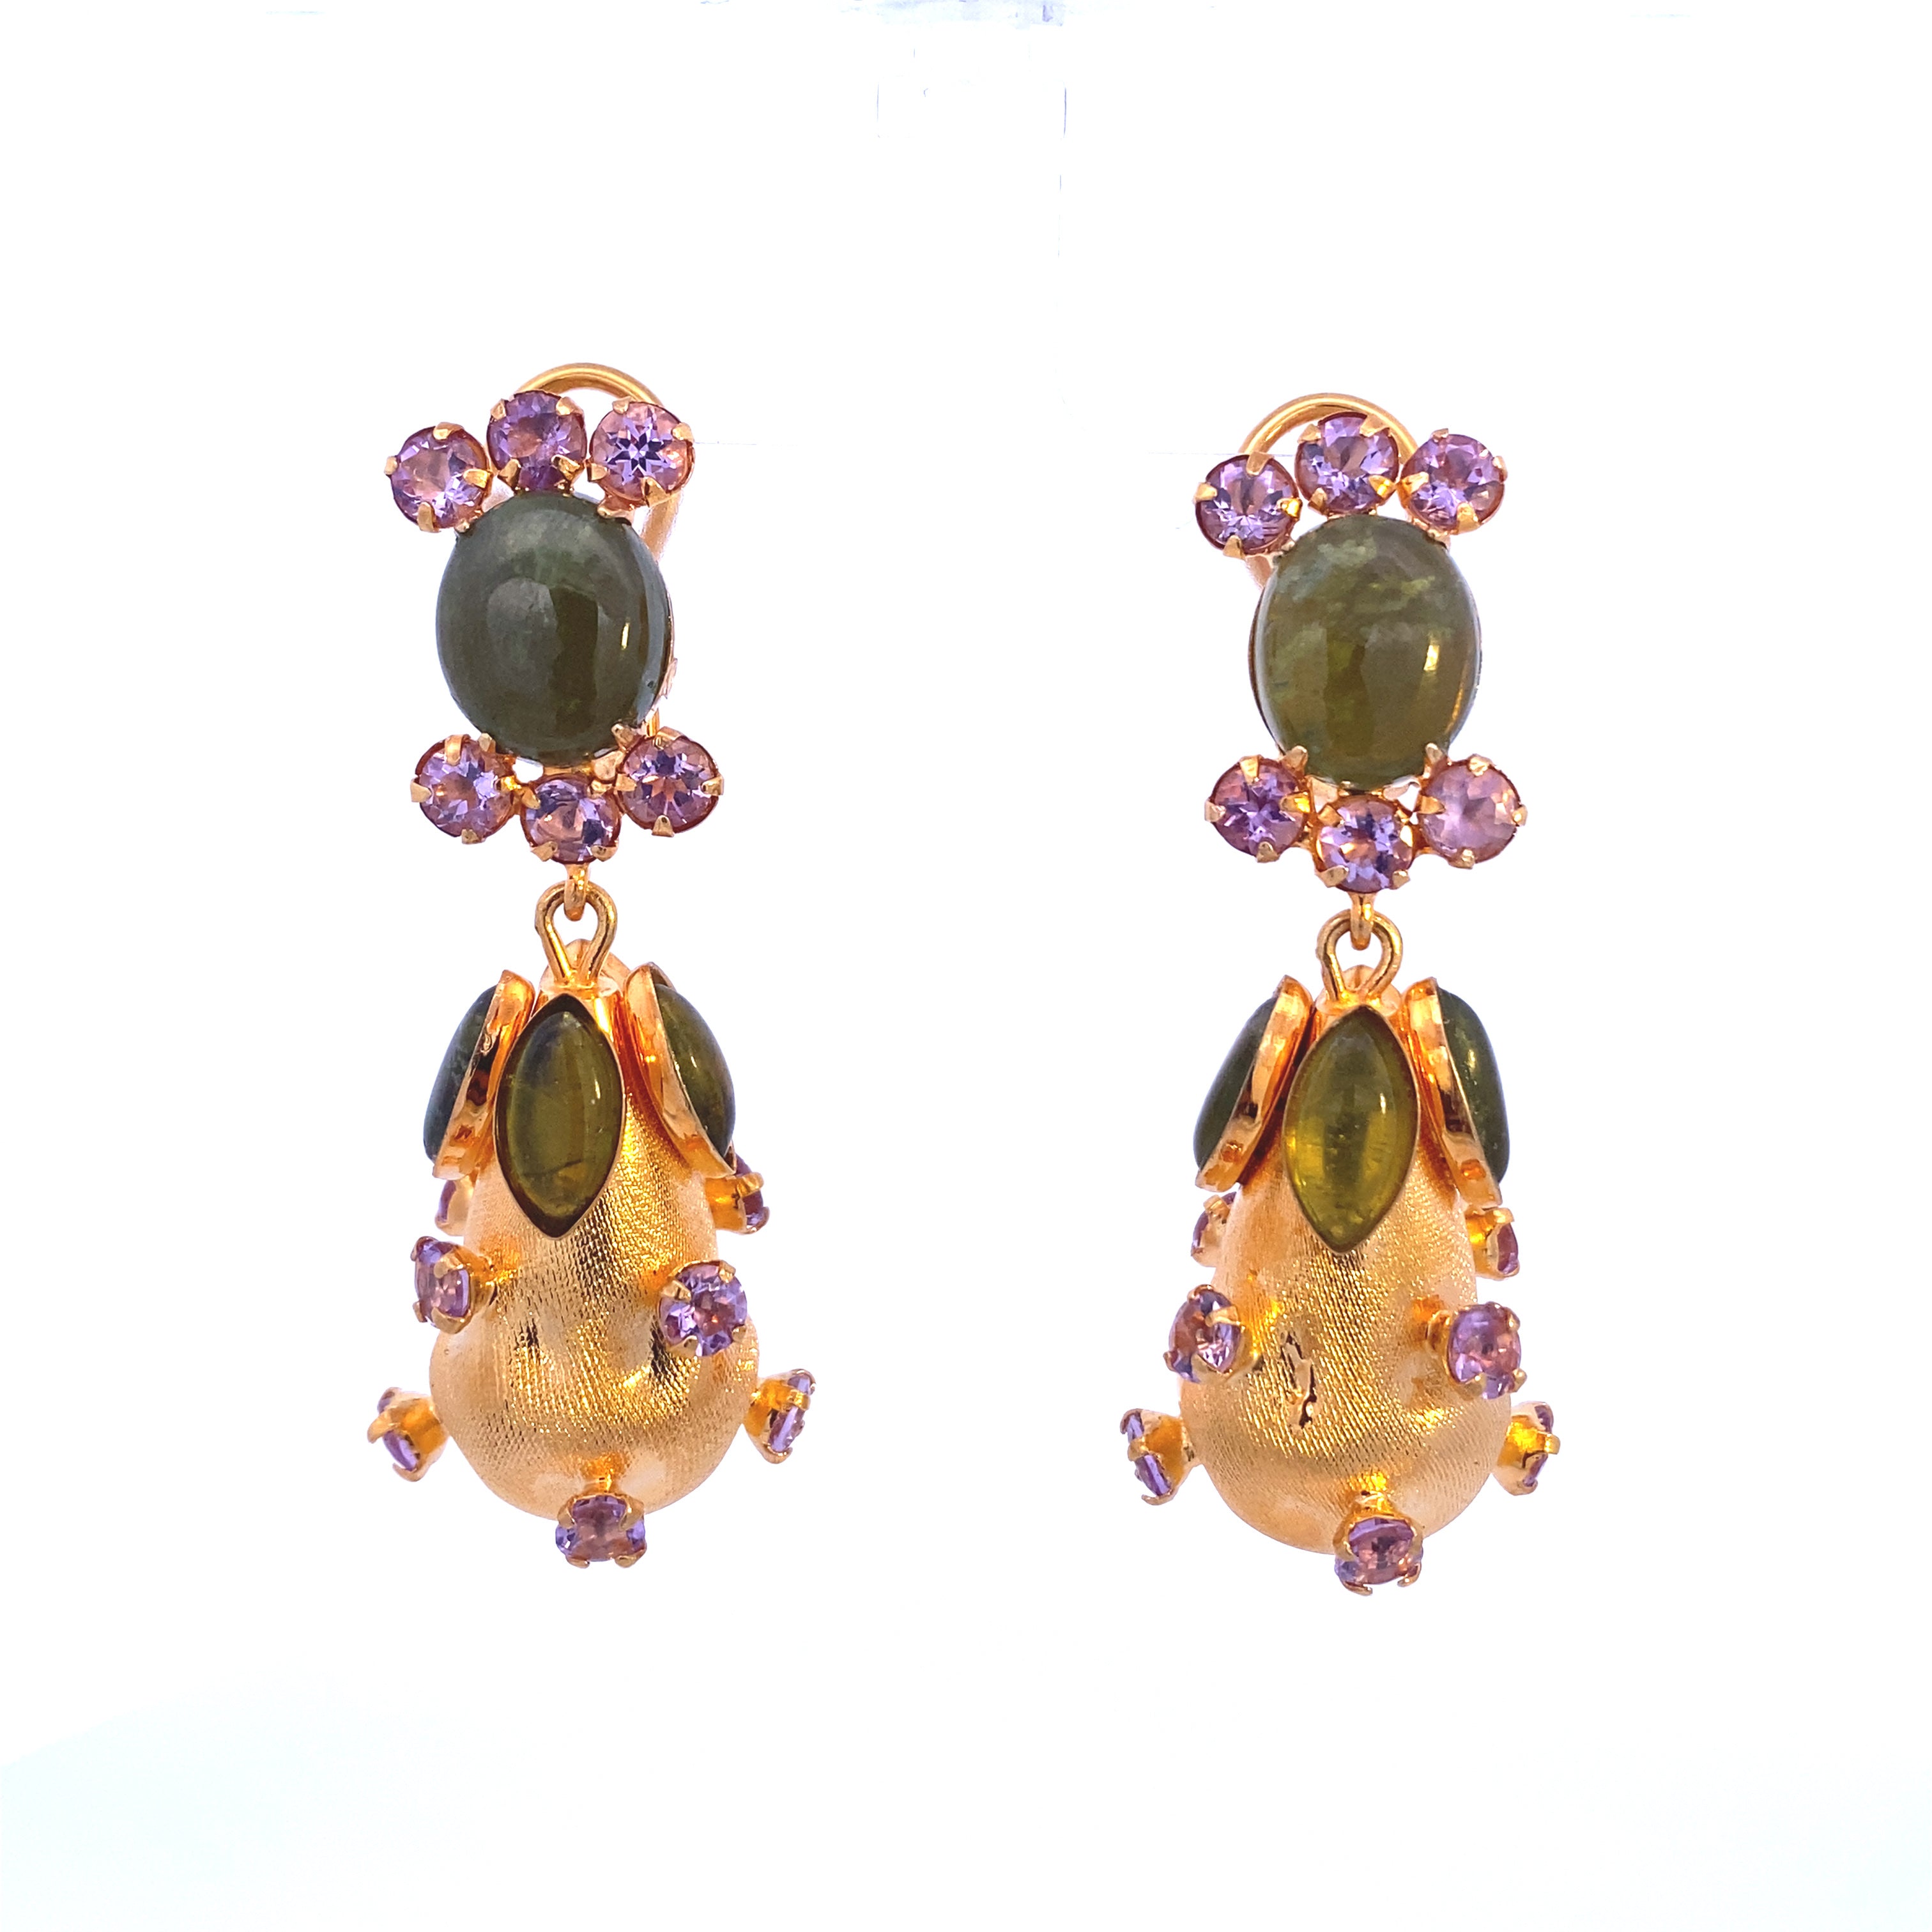 DROP EARRINGS WITH IDOCRASE AND AMETHYST